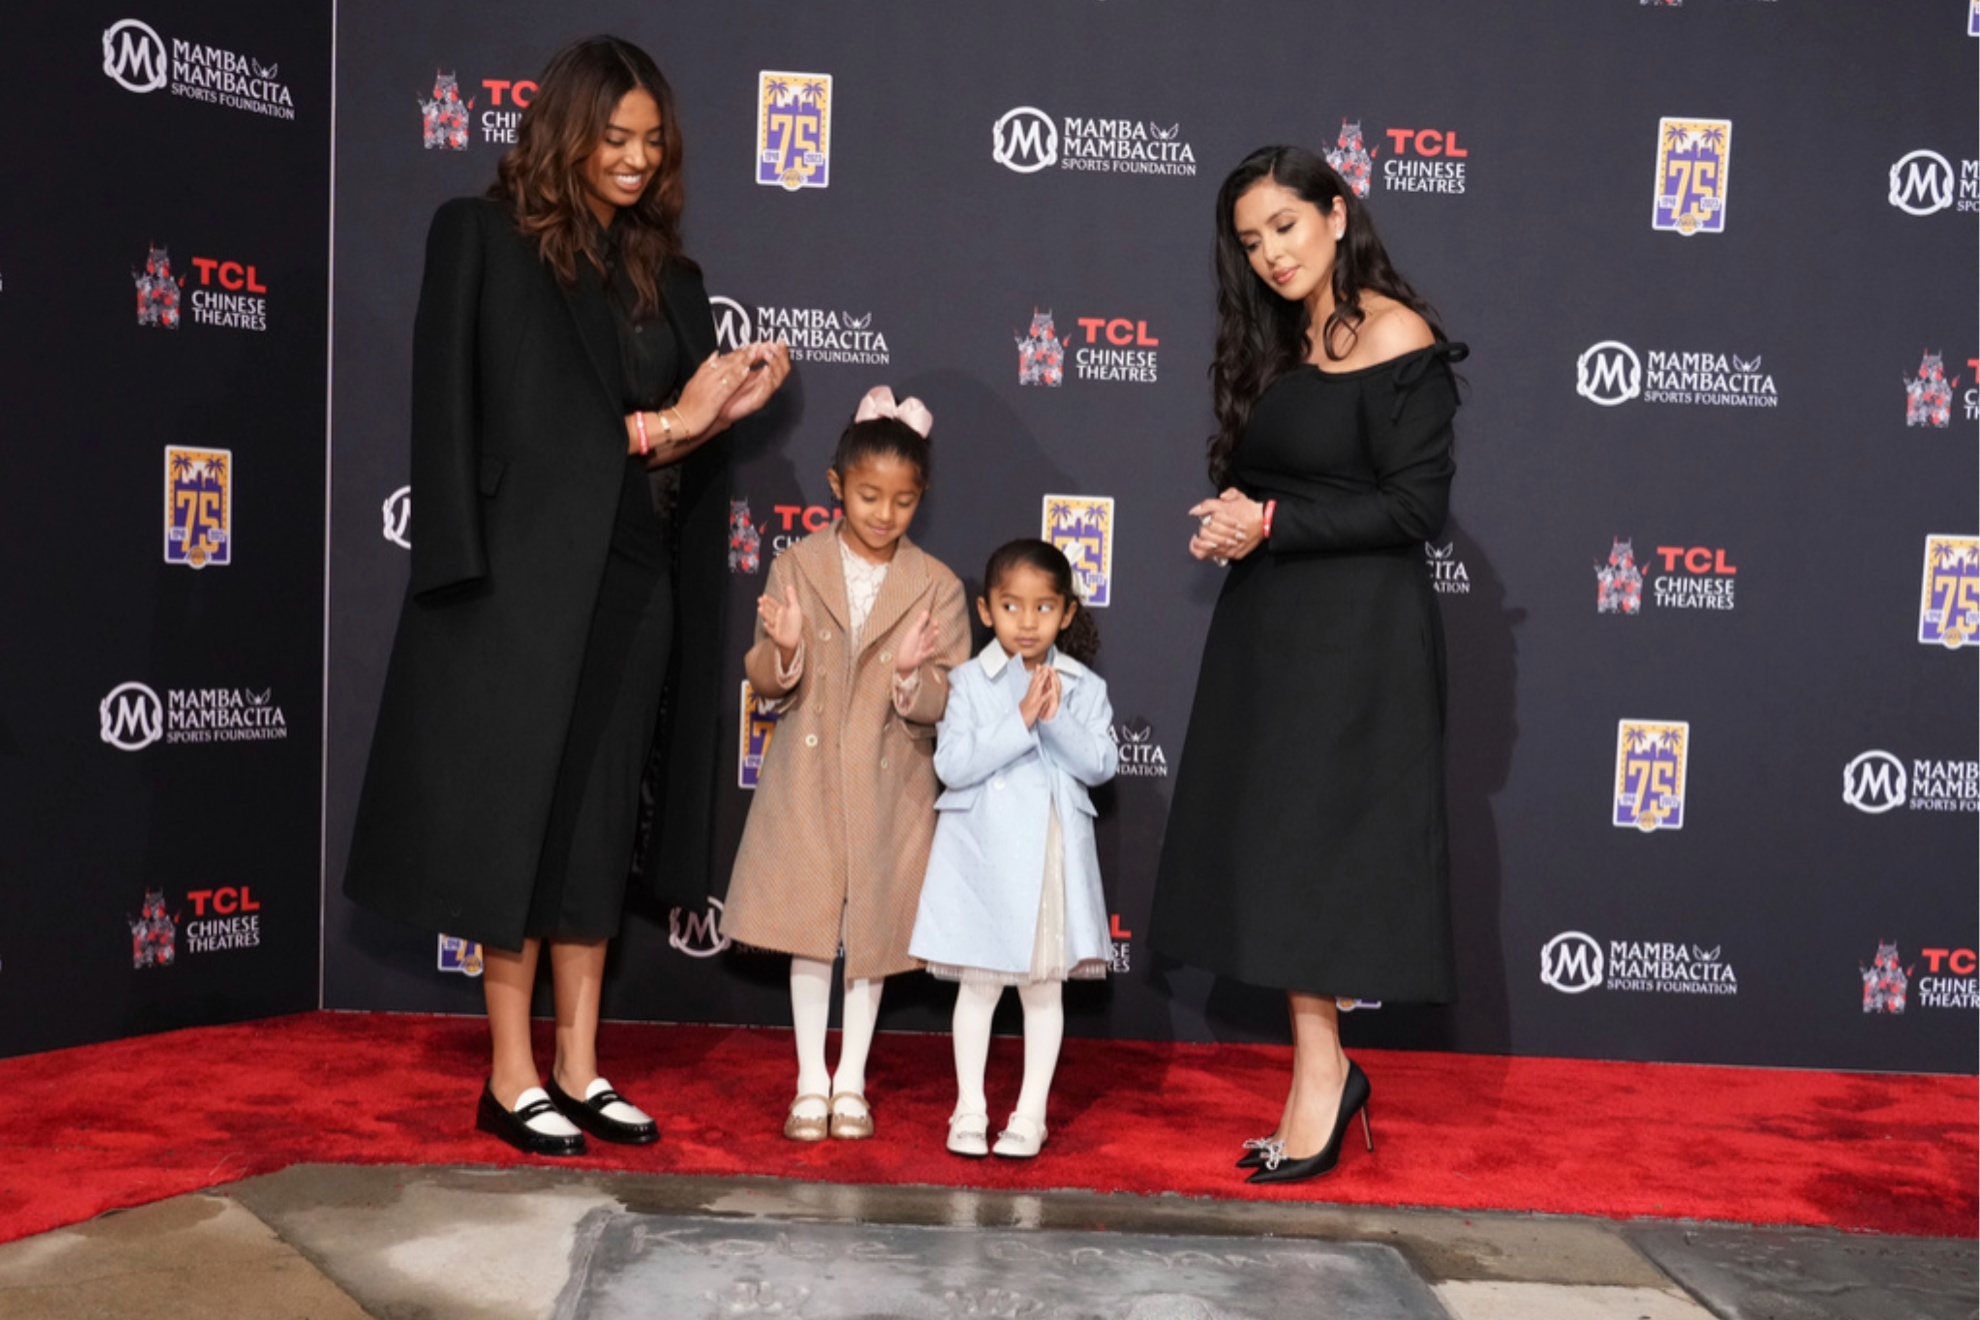 Daugthers Natalia, from left, Bianka and Capri, and wife Vanessa attend a ceremony honoring Kobe Bryant